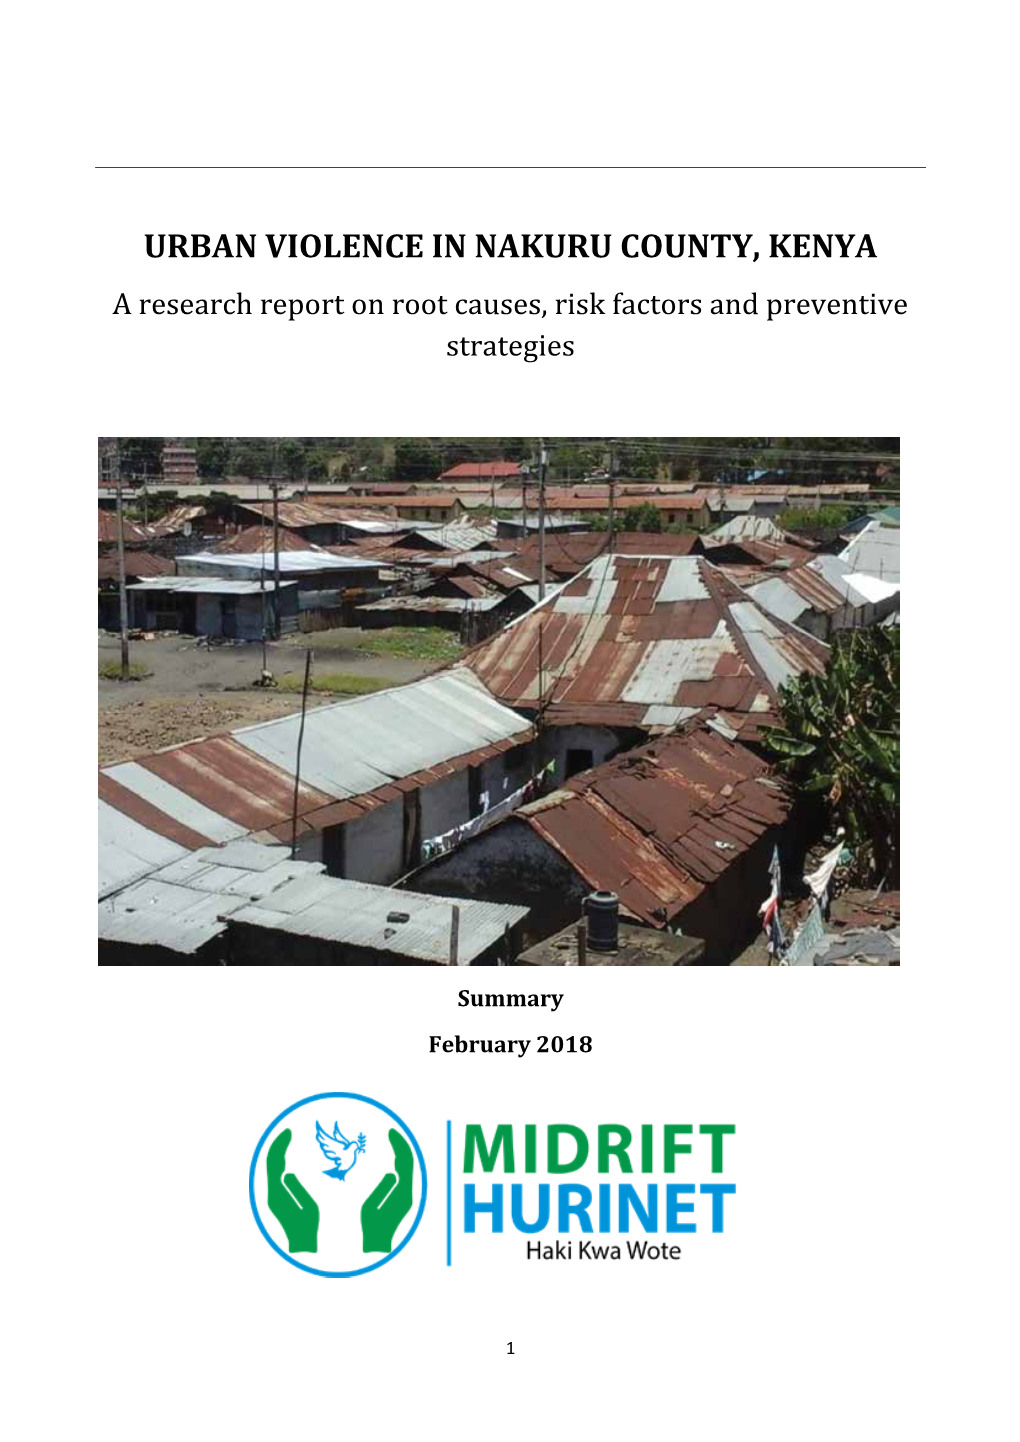 URBAN VIOLENCE in NAKURU COUNTY, KENYA a Research Report on Root Causes, Risk Factors and Preventive Strategies